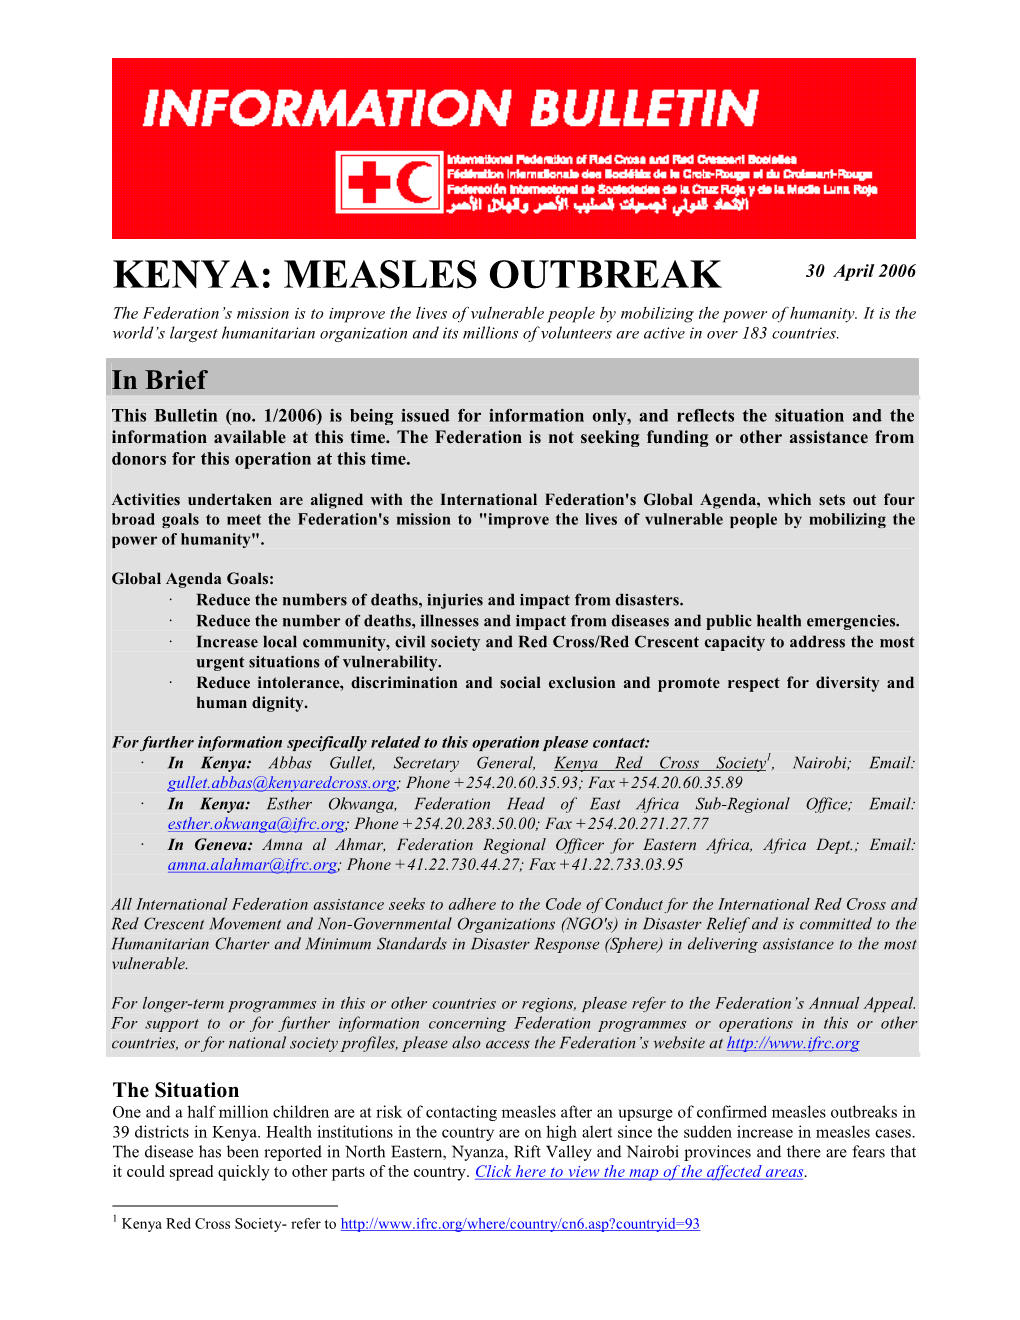 KENYA: MEASLES OUTBREAK 30 April 2006 the Federation’S Mission Is to Improve the Lives of Vulnerable People by Mobilizing the Power of Humanity